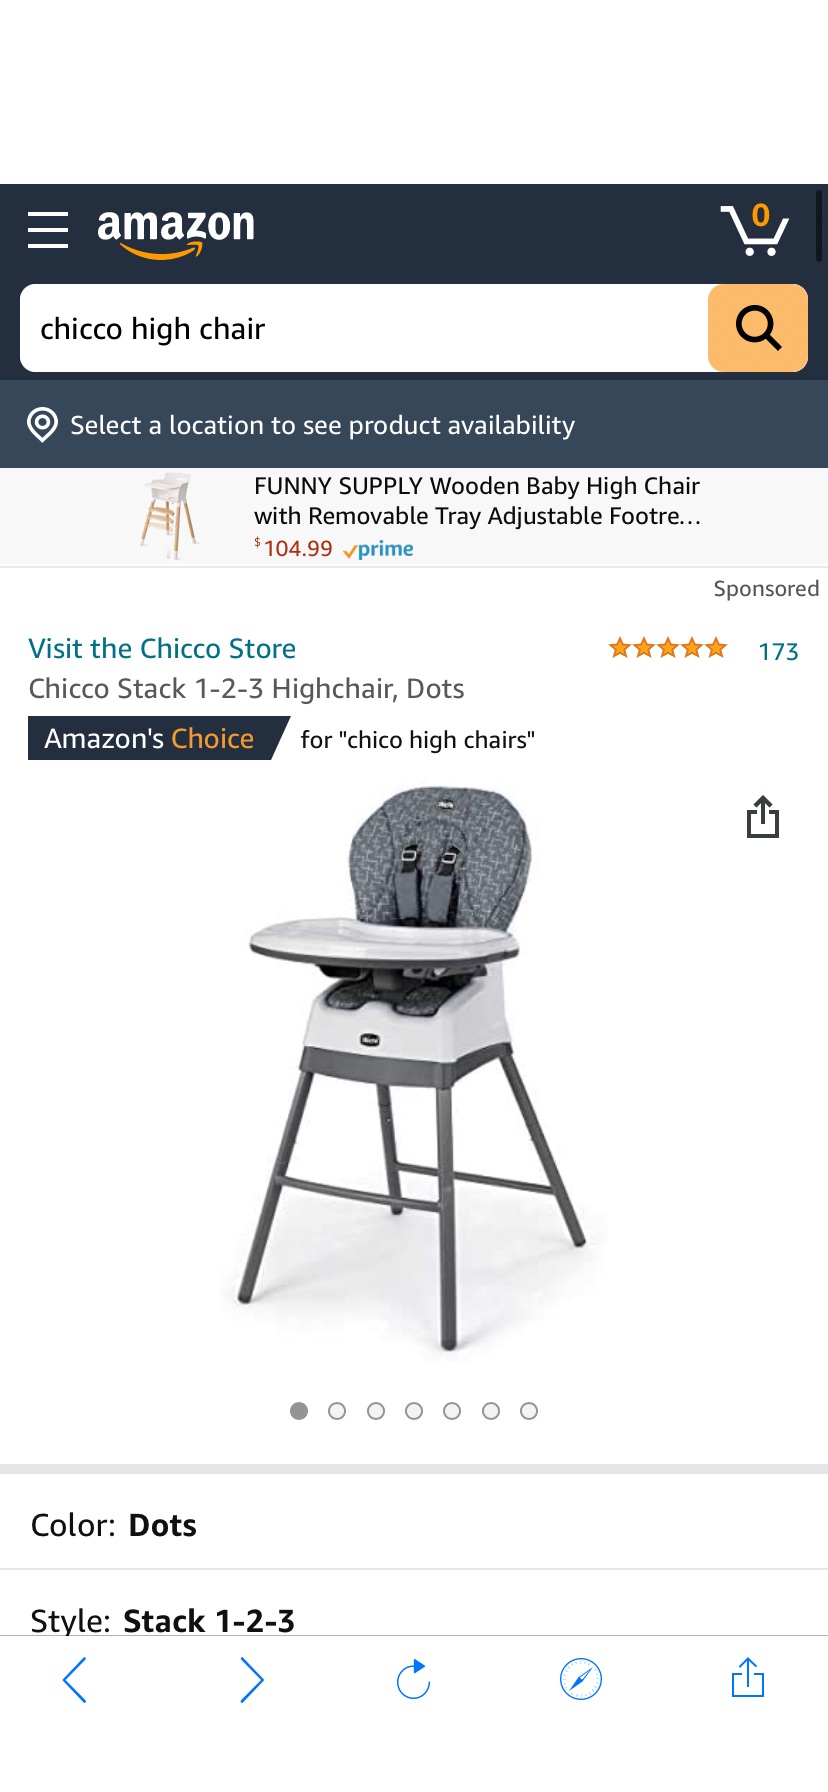 Amazon.com : Chicco Stack 1-2-3 Highchair, Dots : Baby Chicco 餐椅